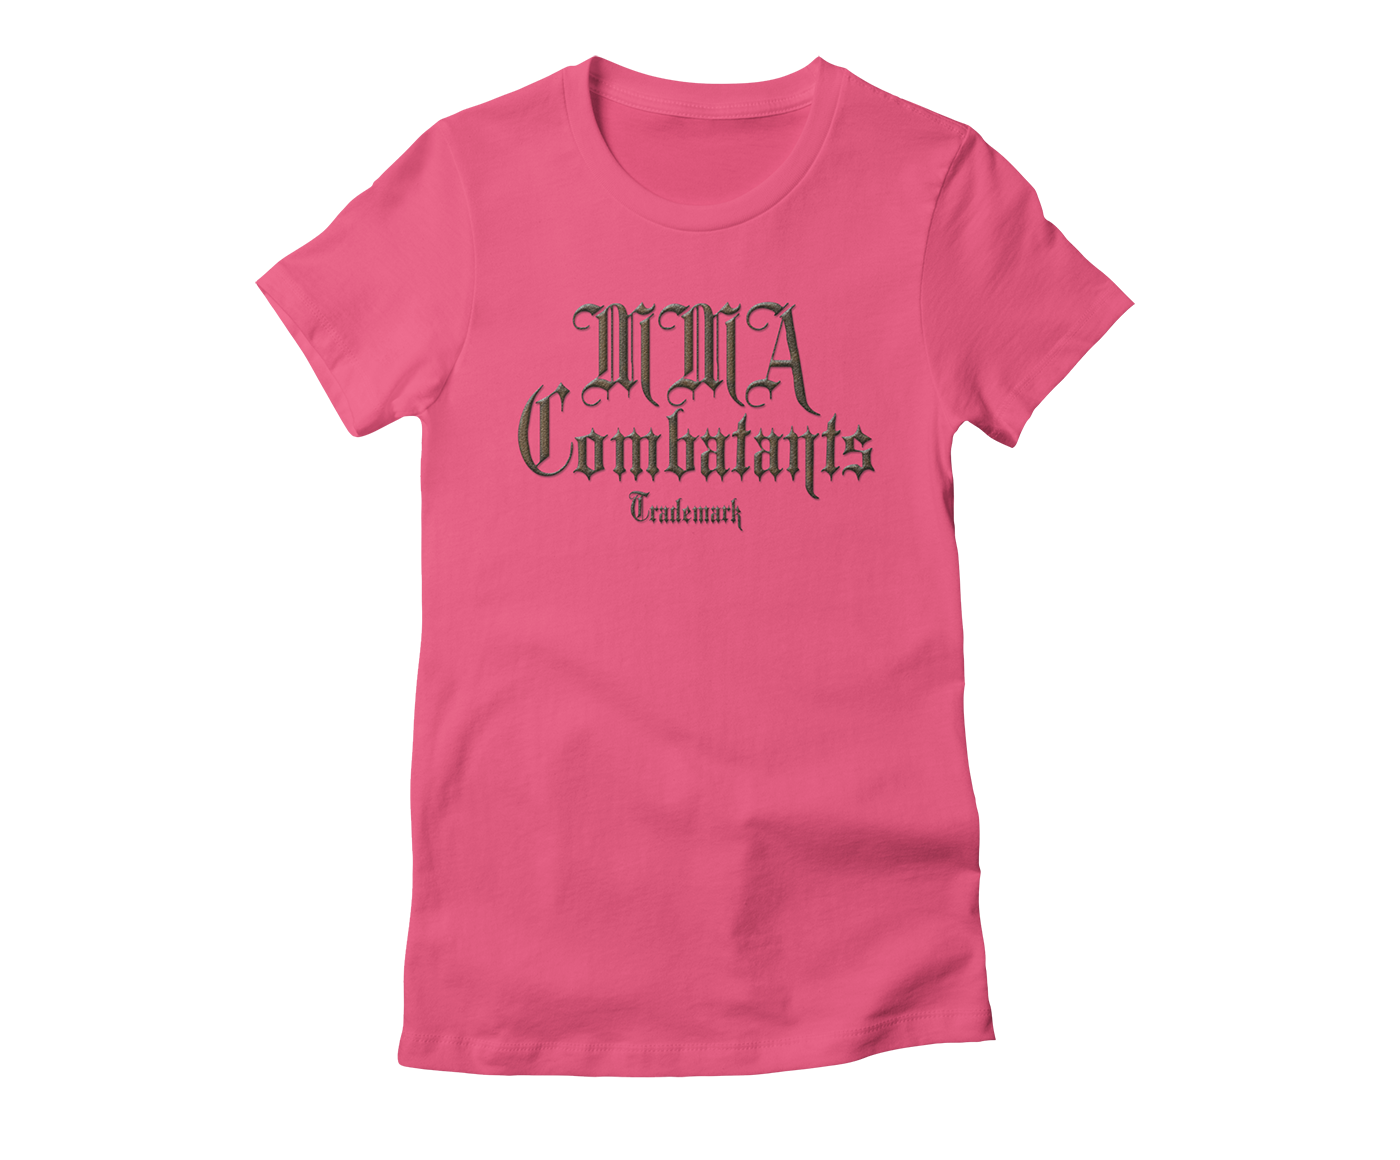 MMA Combatants - Trademark Logo on a Fuchsia Colored Women's Fitted Tee